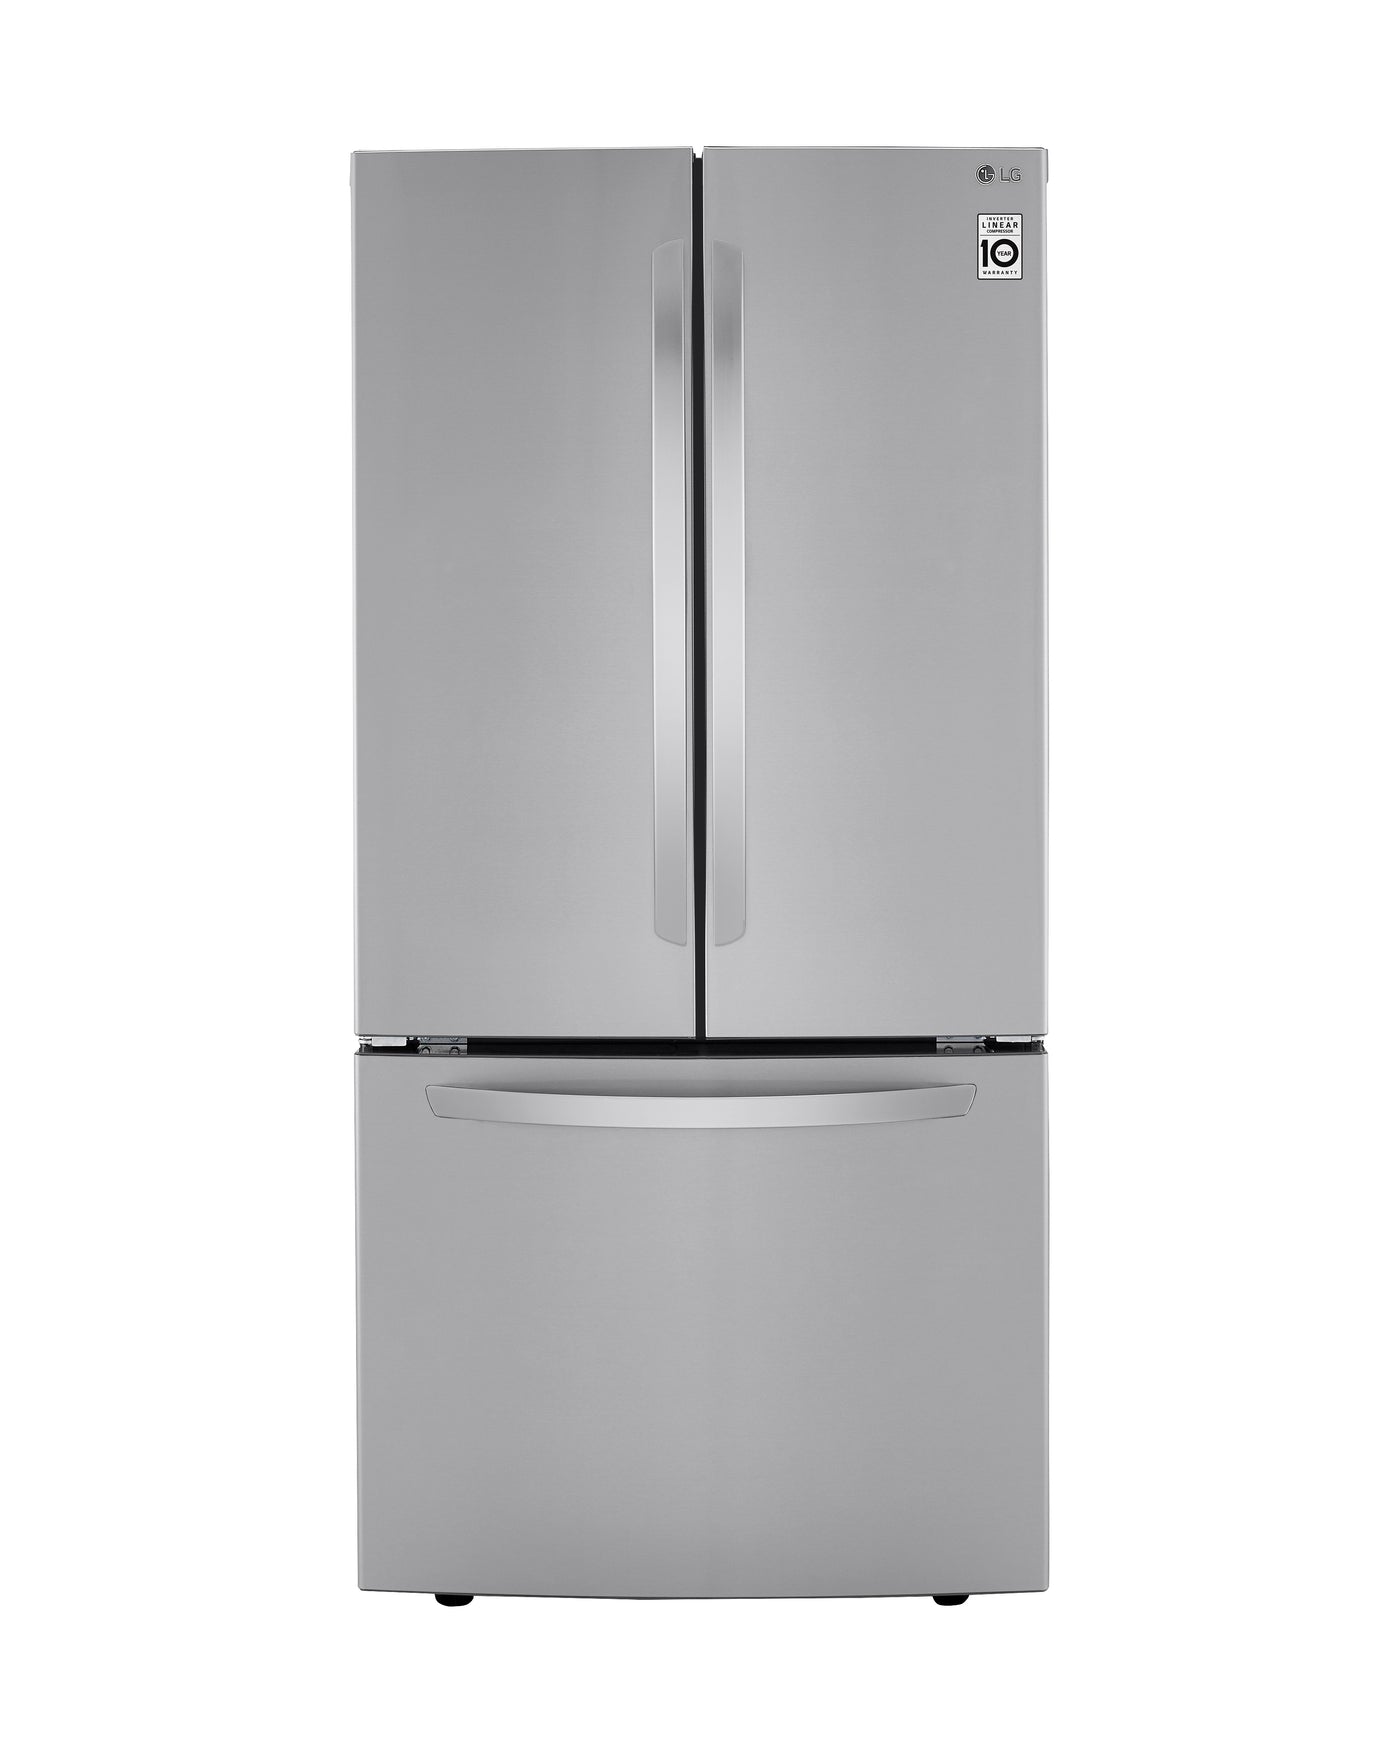 LG Stainless Steel French-Door Refrigerator (25.1 cu. ft.) - LRFCS2503S